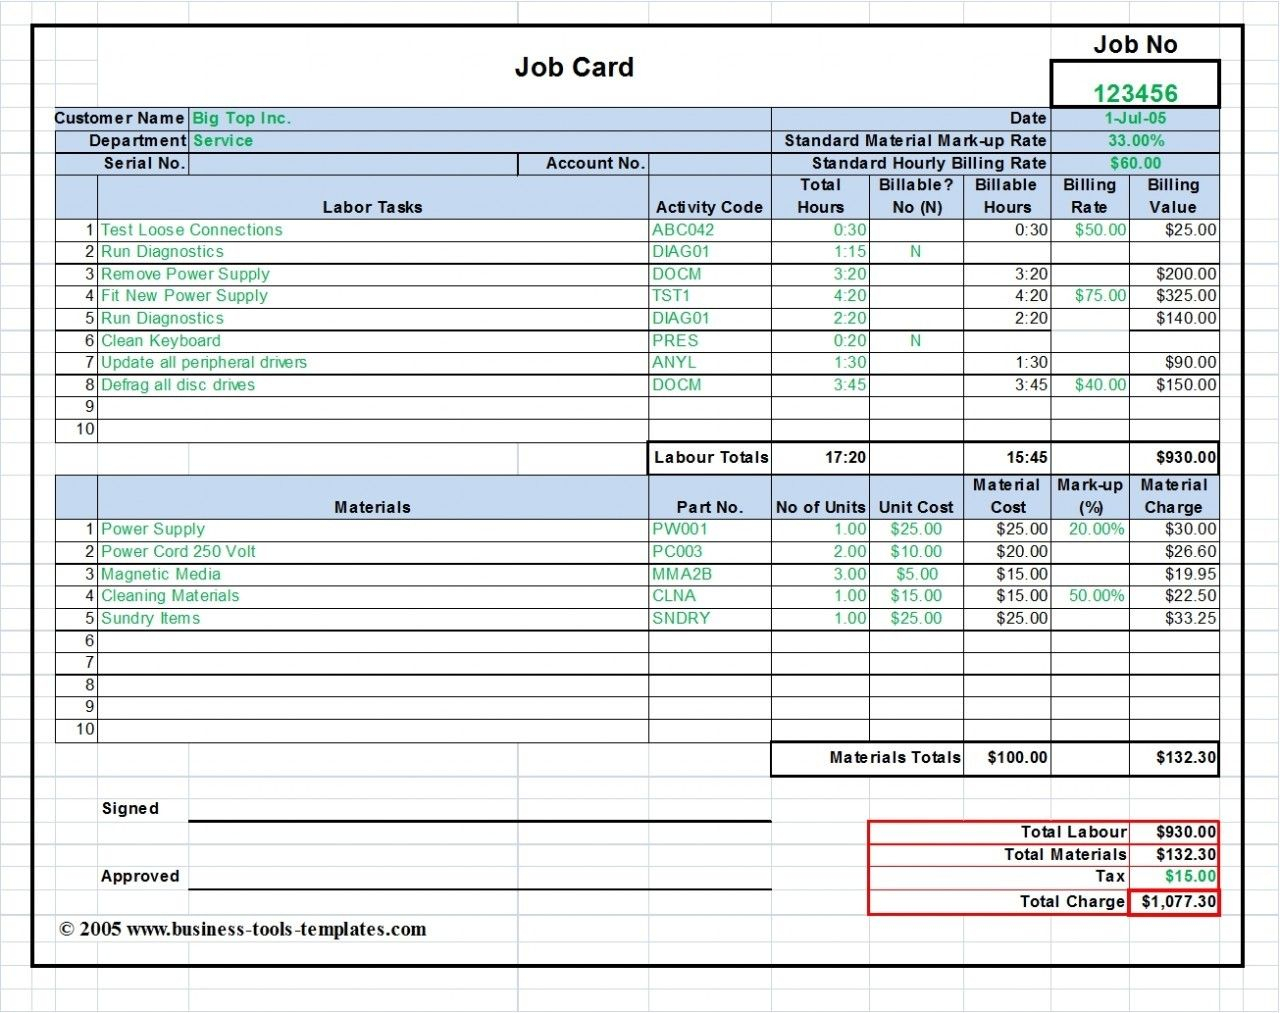 Workshop Job Card Template Excel, Labor & Material Cost Within Job Card Template Mechanic